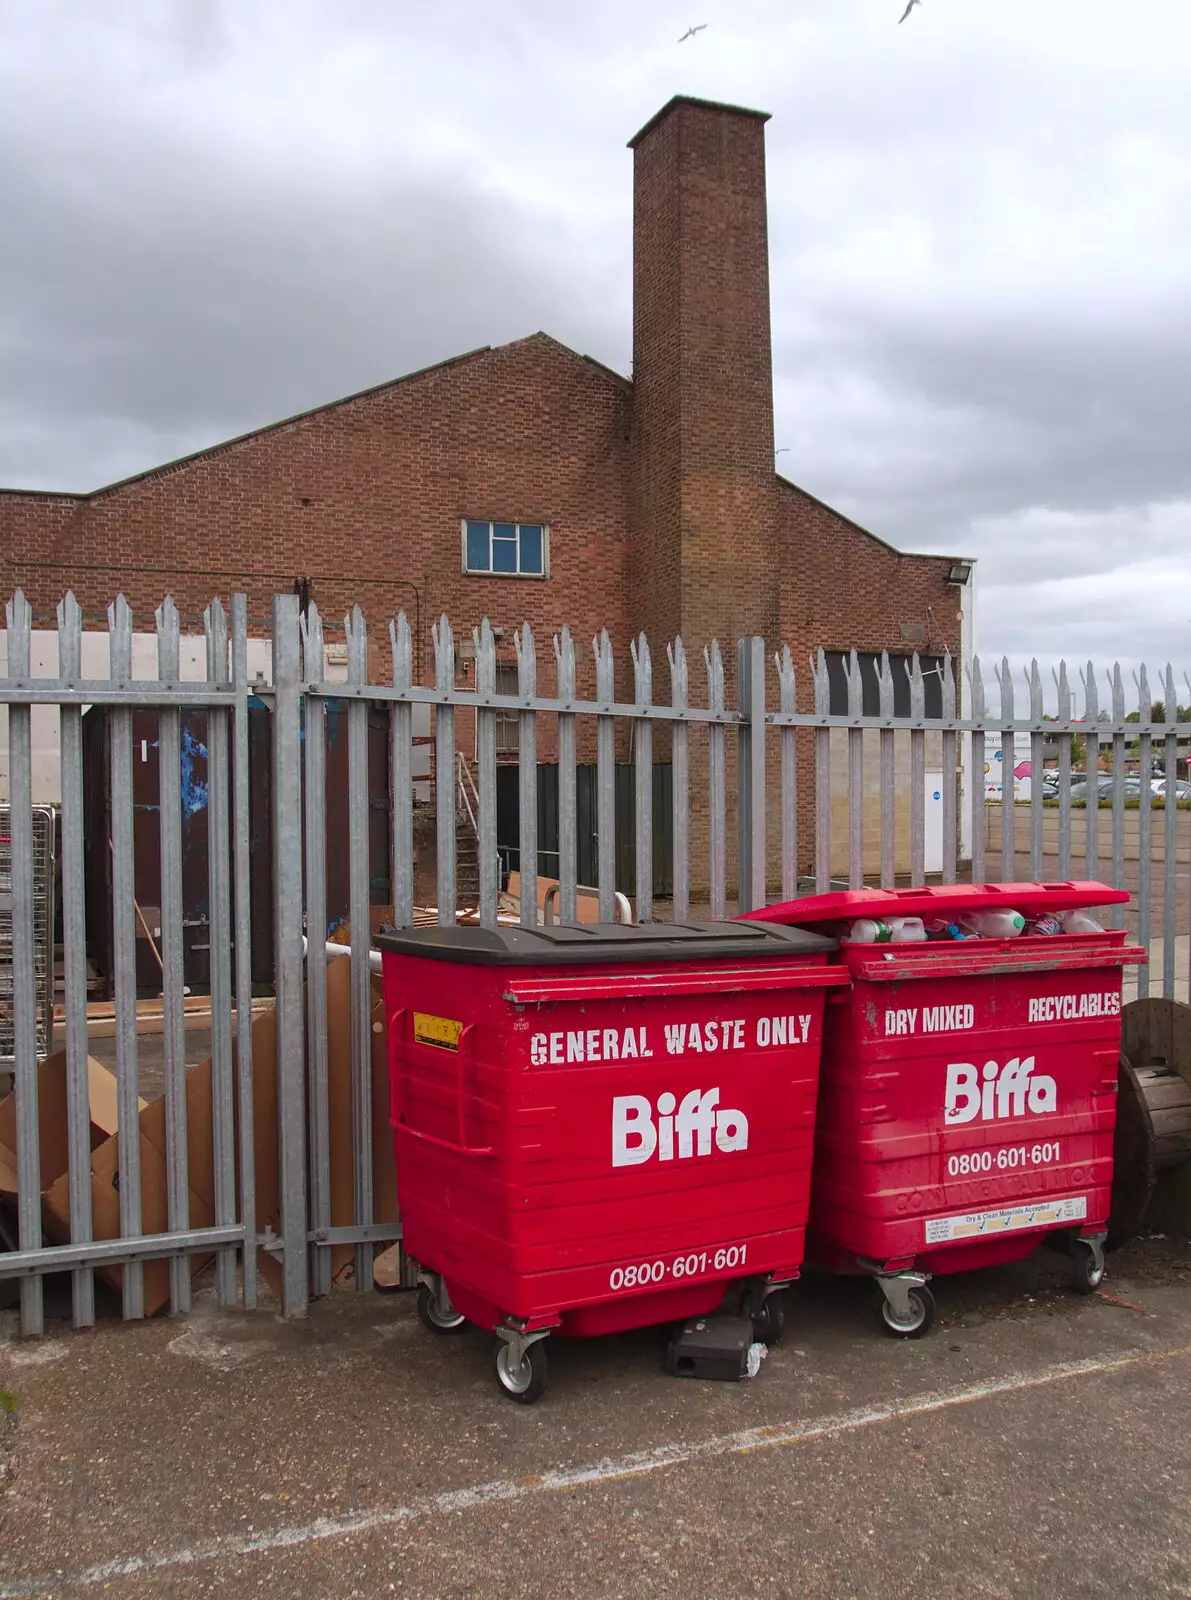 Biffa bins and some old warehouse building, from A Mini Qualcomm Reunion, The Wrestlers, Cambridge - 26th April 2019